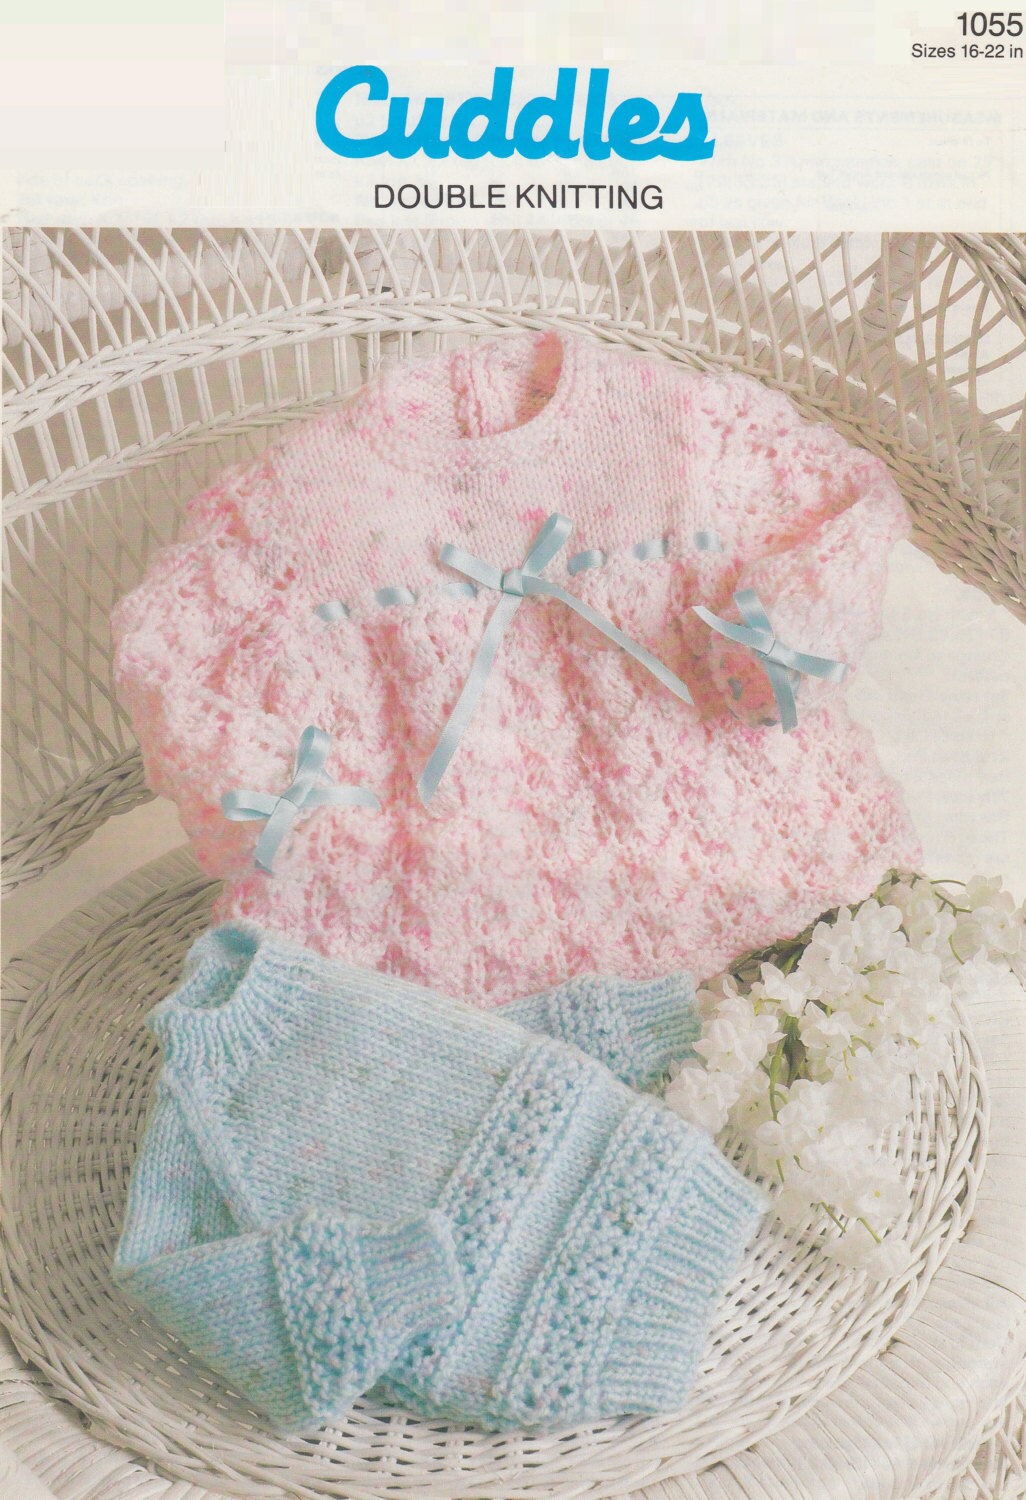 Baby's Jumper and Angel Top in DK 8 ply yarn sizes 16